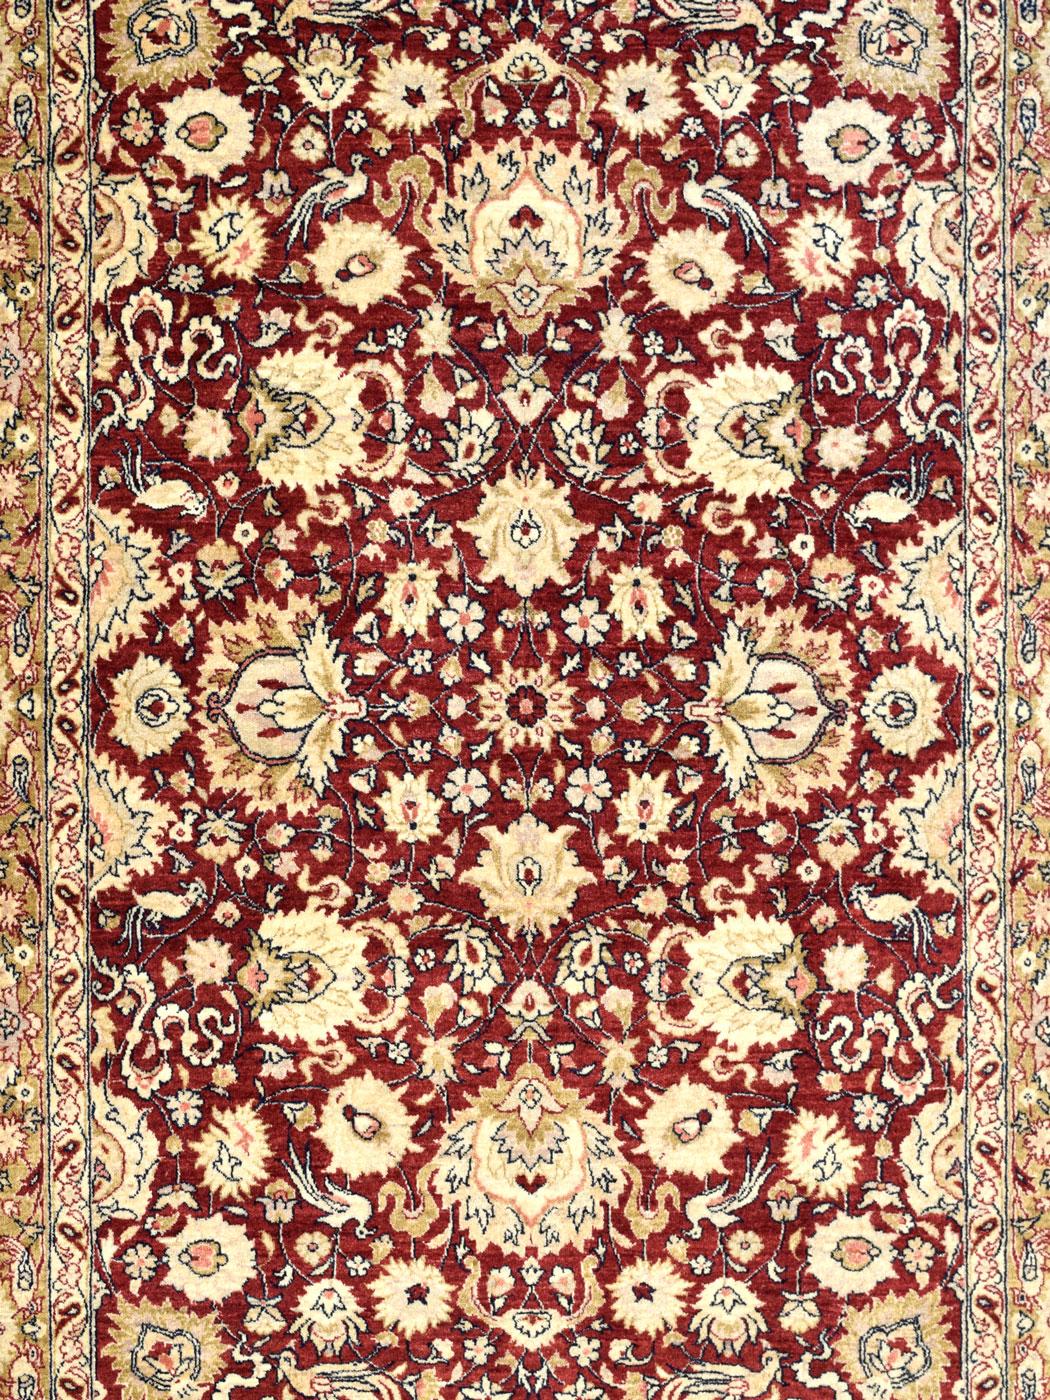 Rich tones of red, gold, and cream evoke elegance in this pure wool Persian area rug utilizing Orley Shabahang's exquisite Mohtasham weave in a versatile 5' x 7' size. Measuring exactly 5'2